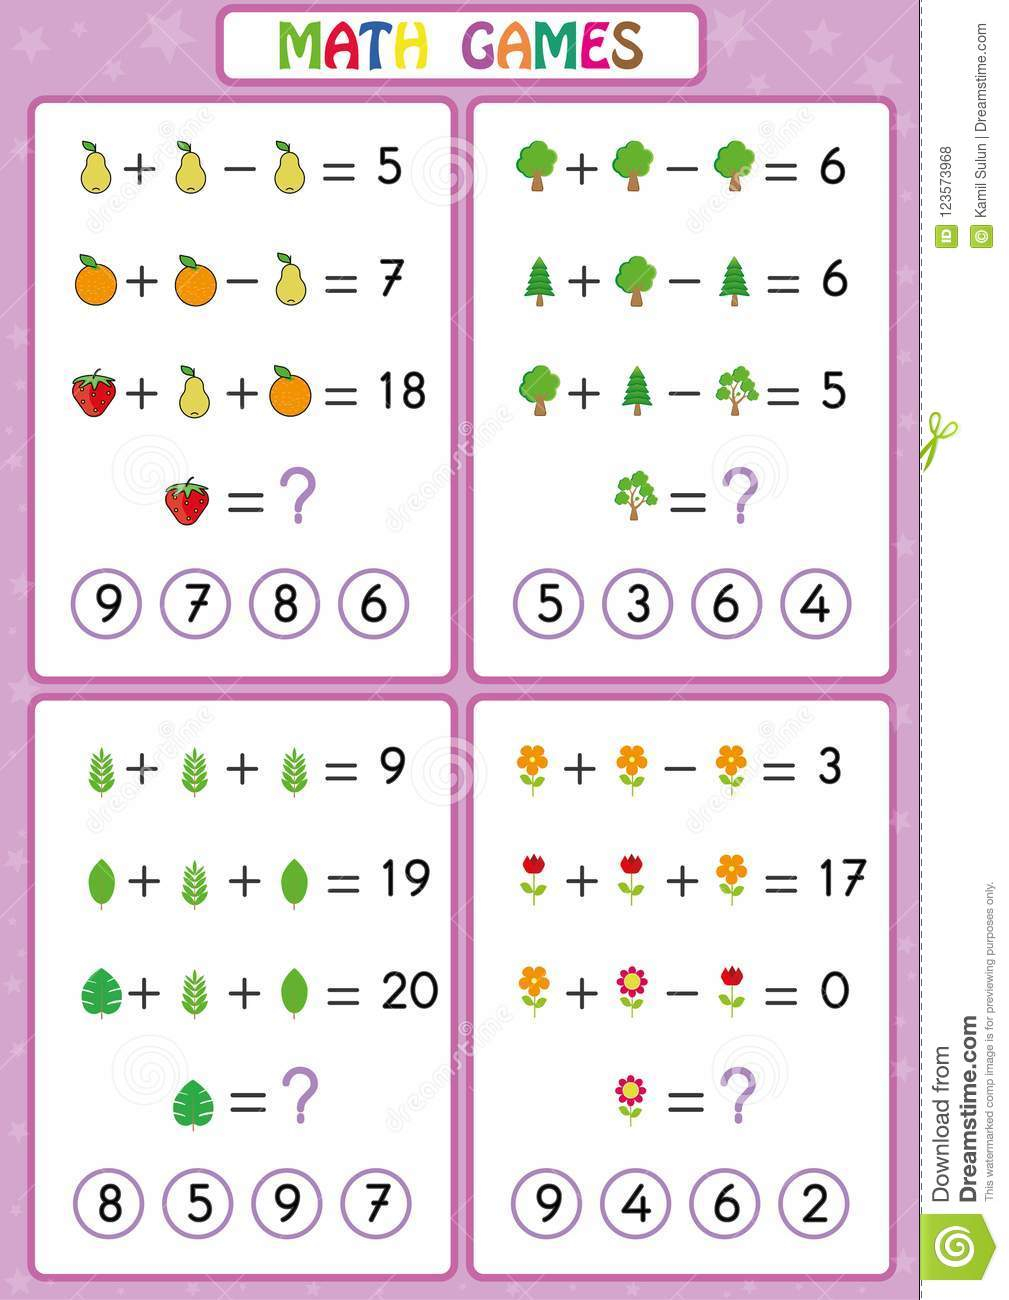 Mathematics Educational Game For Kids Fun Worksheets For Children